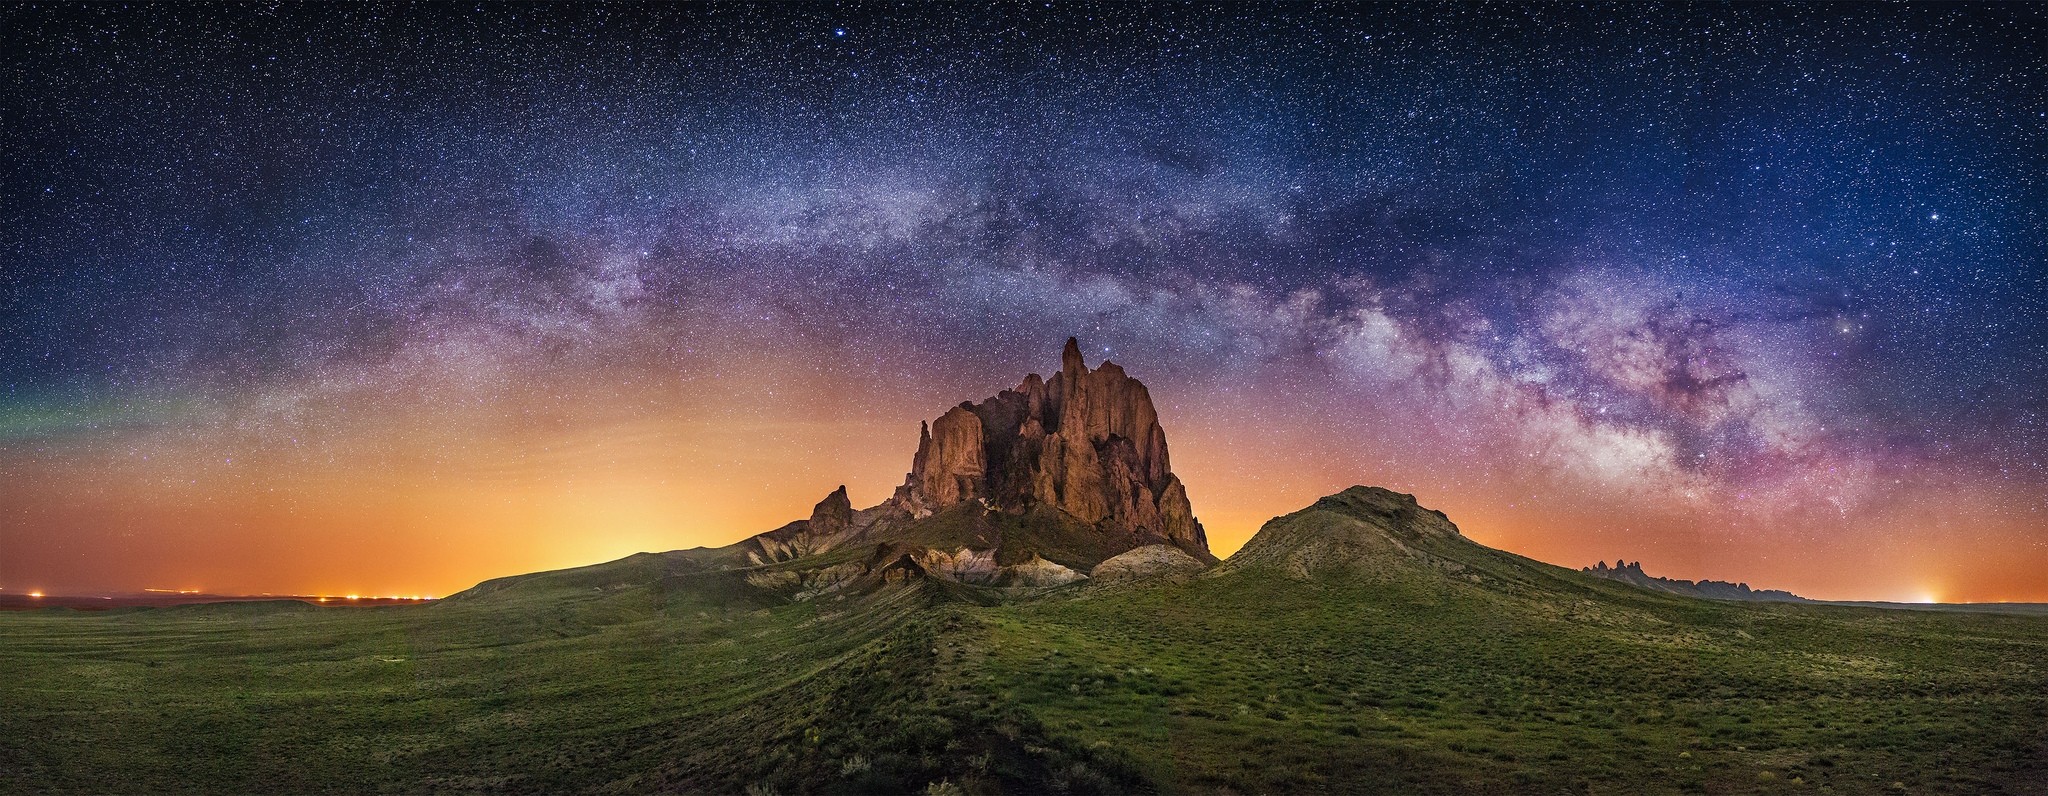 Nature Photography Landscape Milky Way Starry Night Rock Lights Galaxy Long Exposure New Mexico 2048x796